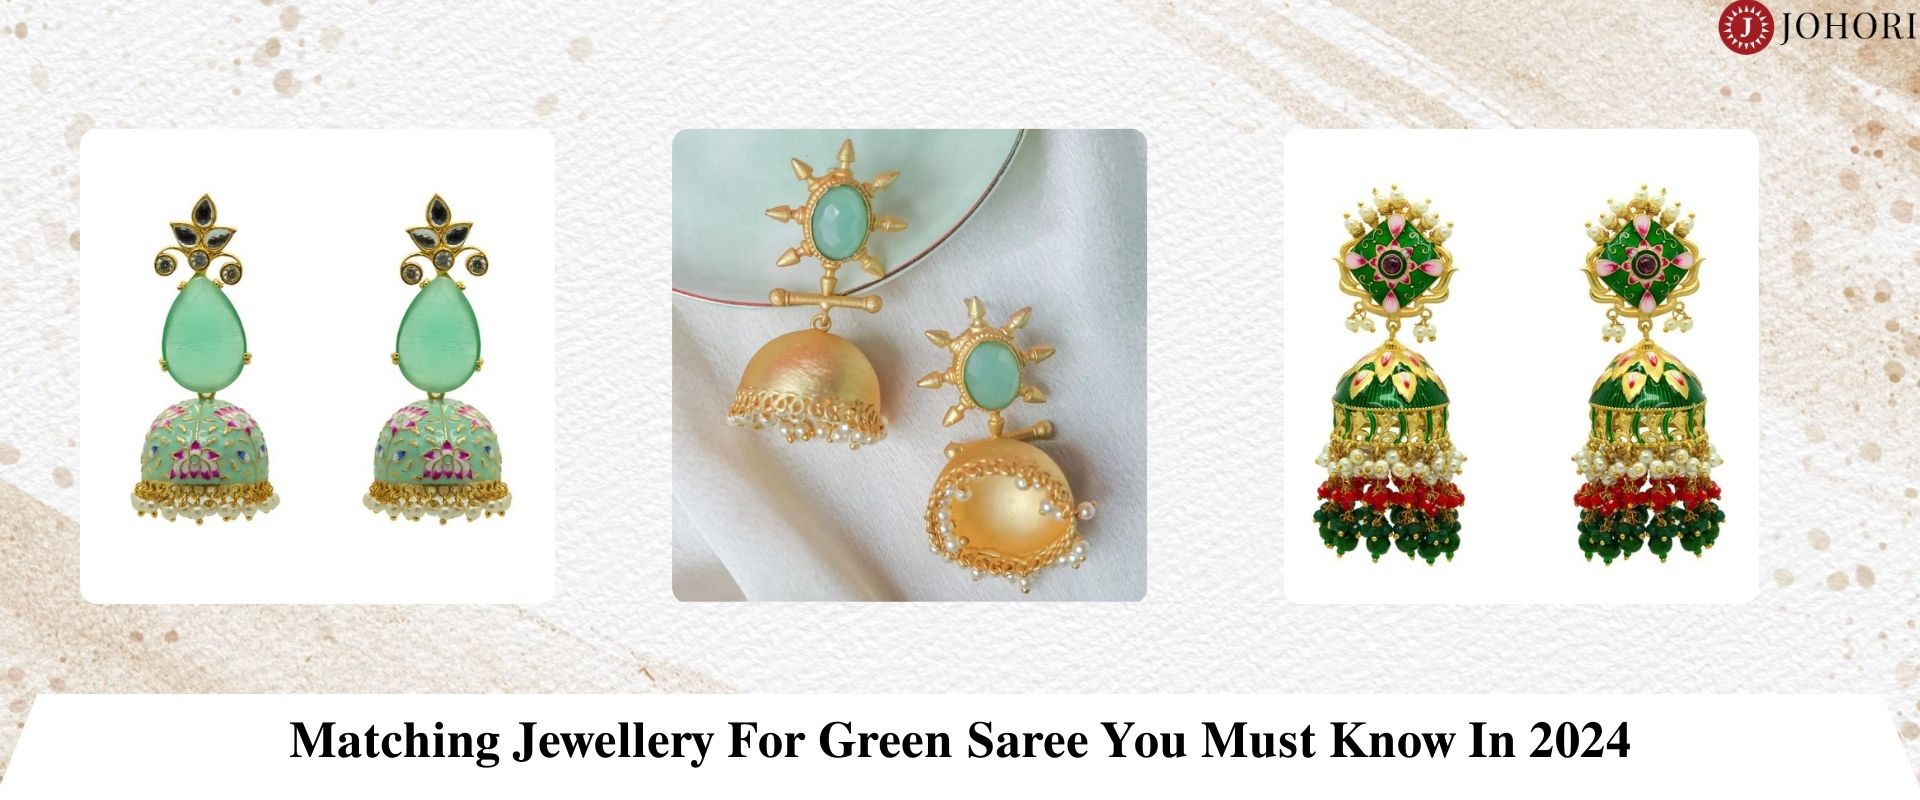 Matching Jewellery For Green Saree You Must Know In 2024